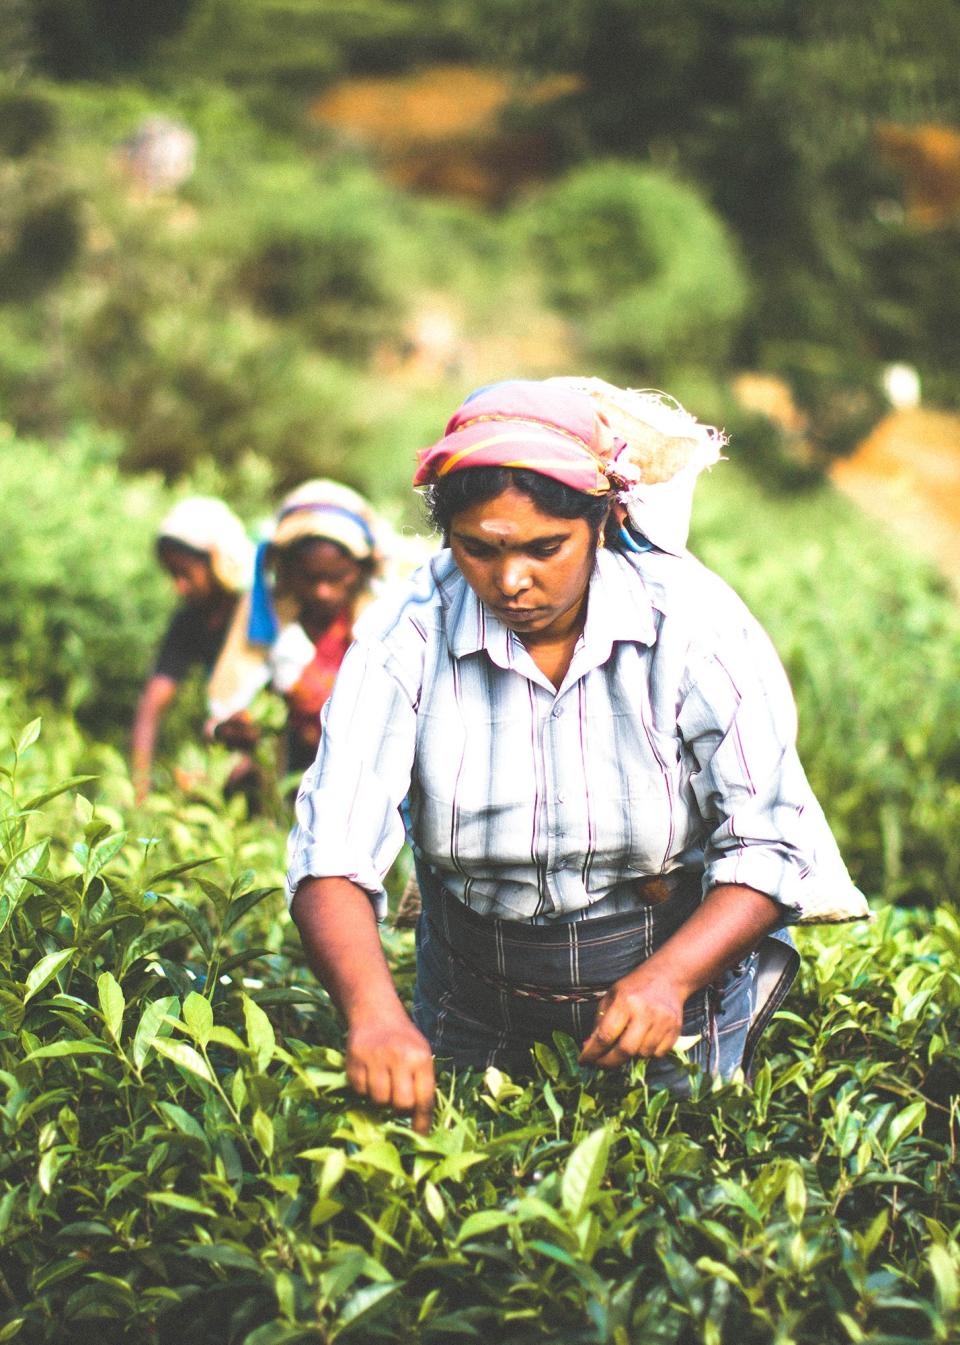 Learn about the origins of Sri Lanka's tea industry, and where it's going next, from the the hilltop town of Kandy to the forests of Hatton and the urban adventure of Colombo.